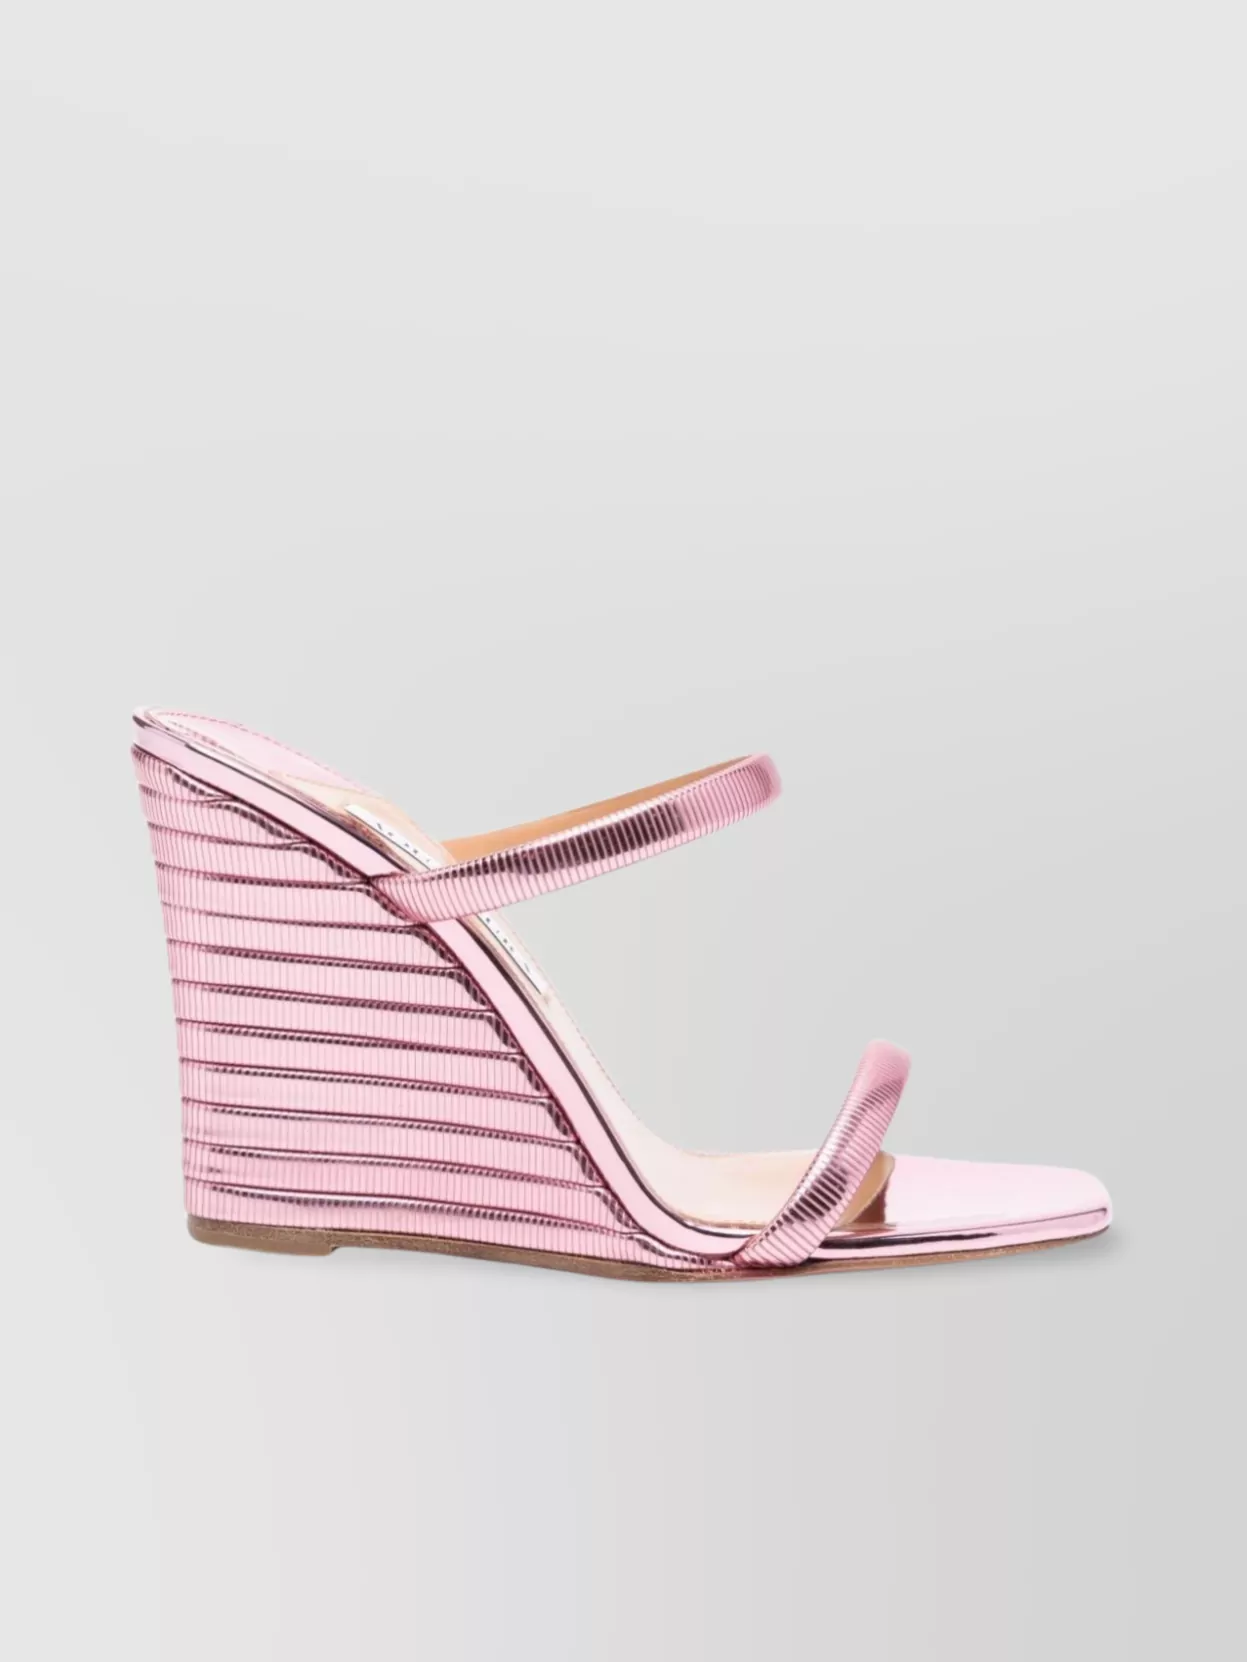 Shop Aquazzura Wedge Heel Mules With Open Toe And Striped Pattern